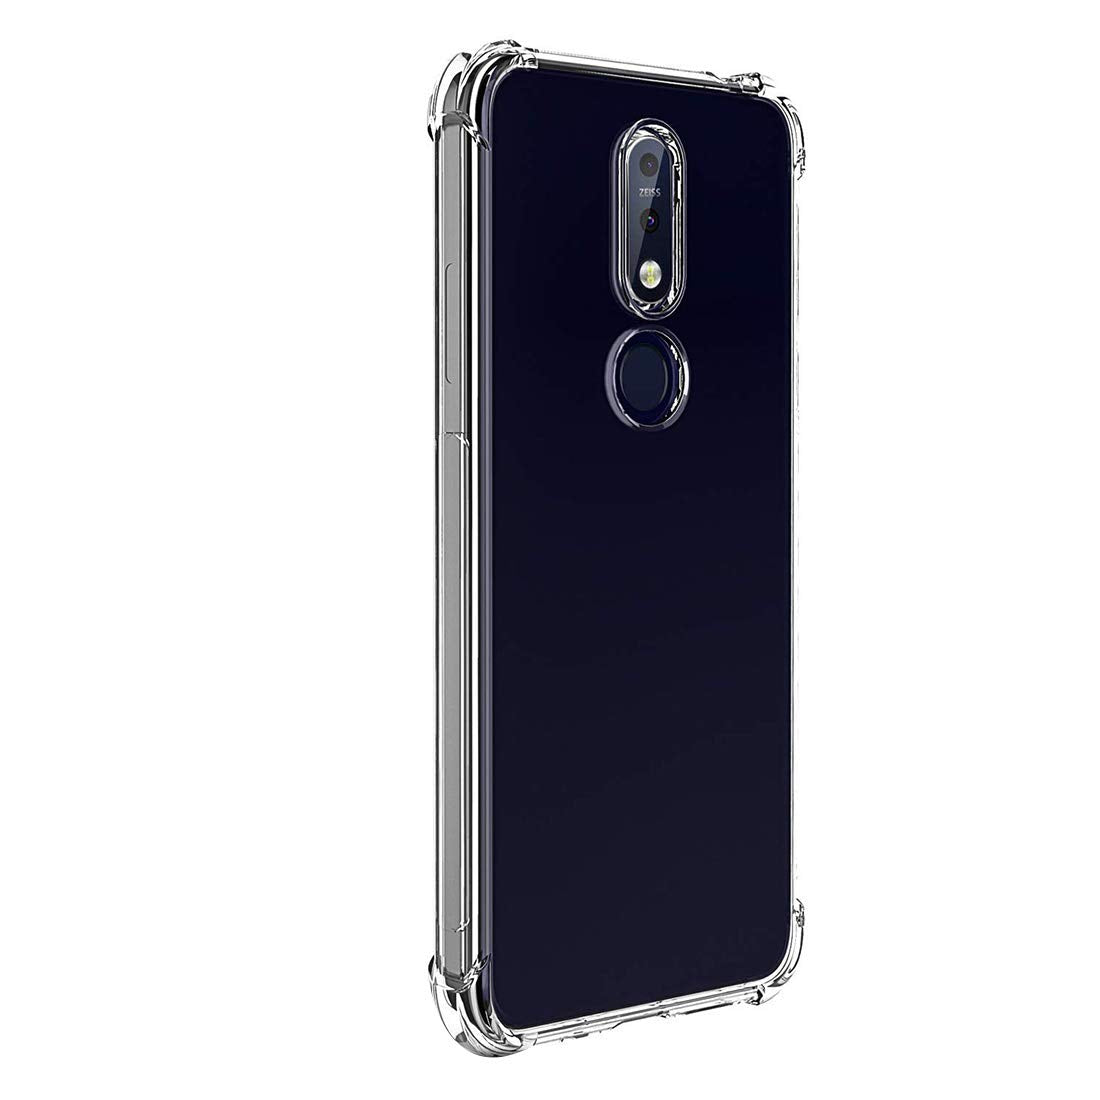 Hybrid Clear Case for Nokia 7.1